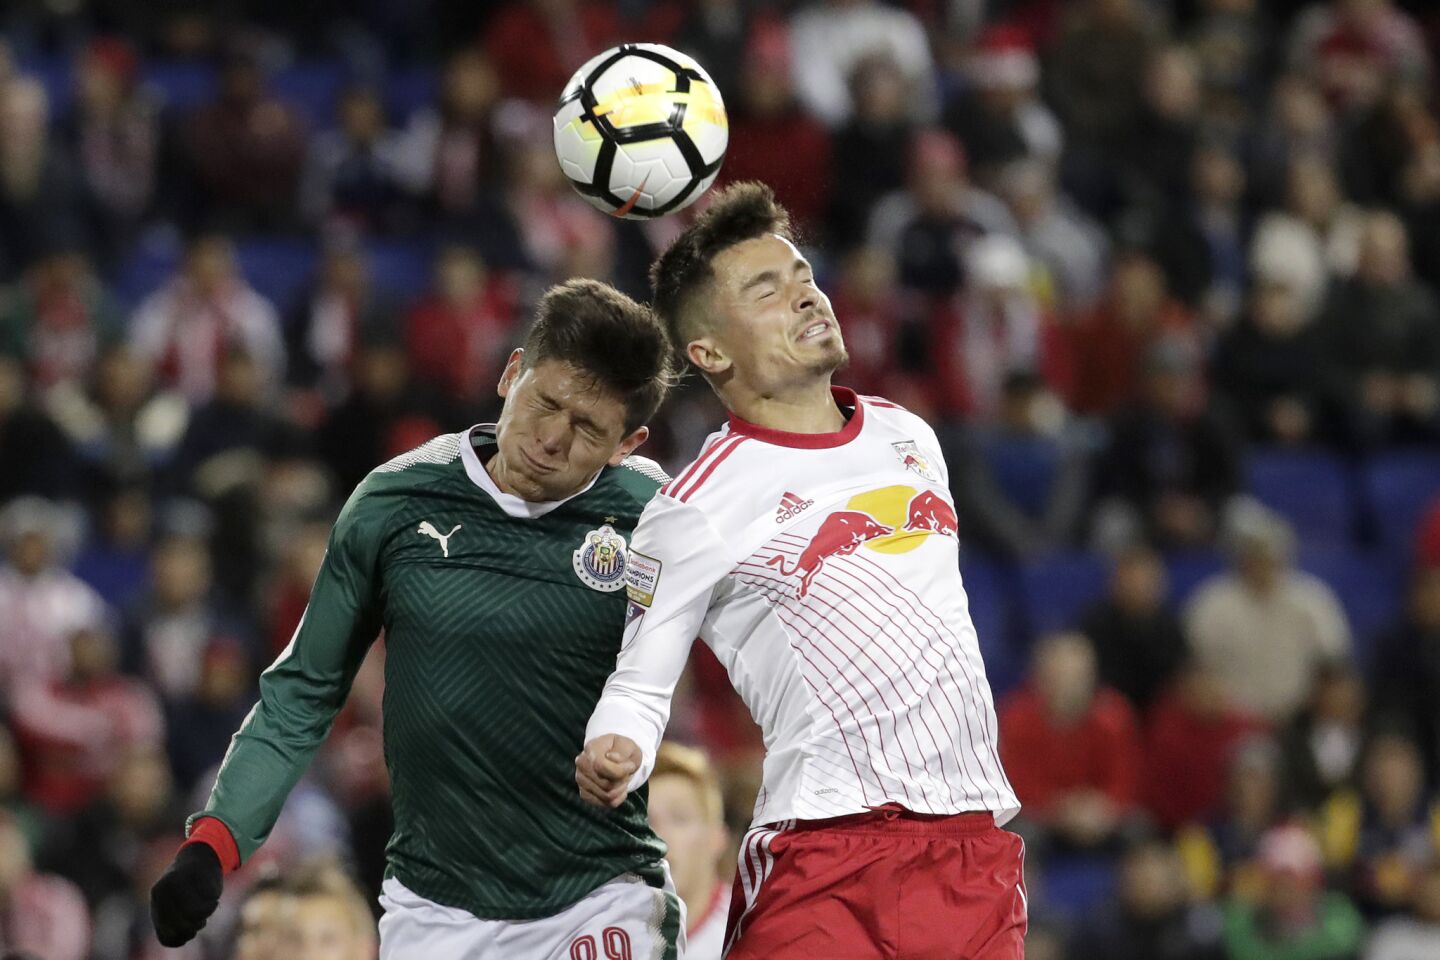 Guadalajara forward Jesus Godinez, left, and New York Red Bulls midfielder Florian Valot go up for the ball during the first half of the second leg of a CONCACAF Champions League soccer semifinal, Tuesday, April 10, 2018, in Harrison, N.J. (AP Photo/Julio Cortez)